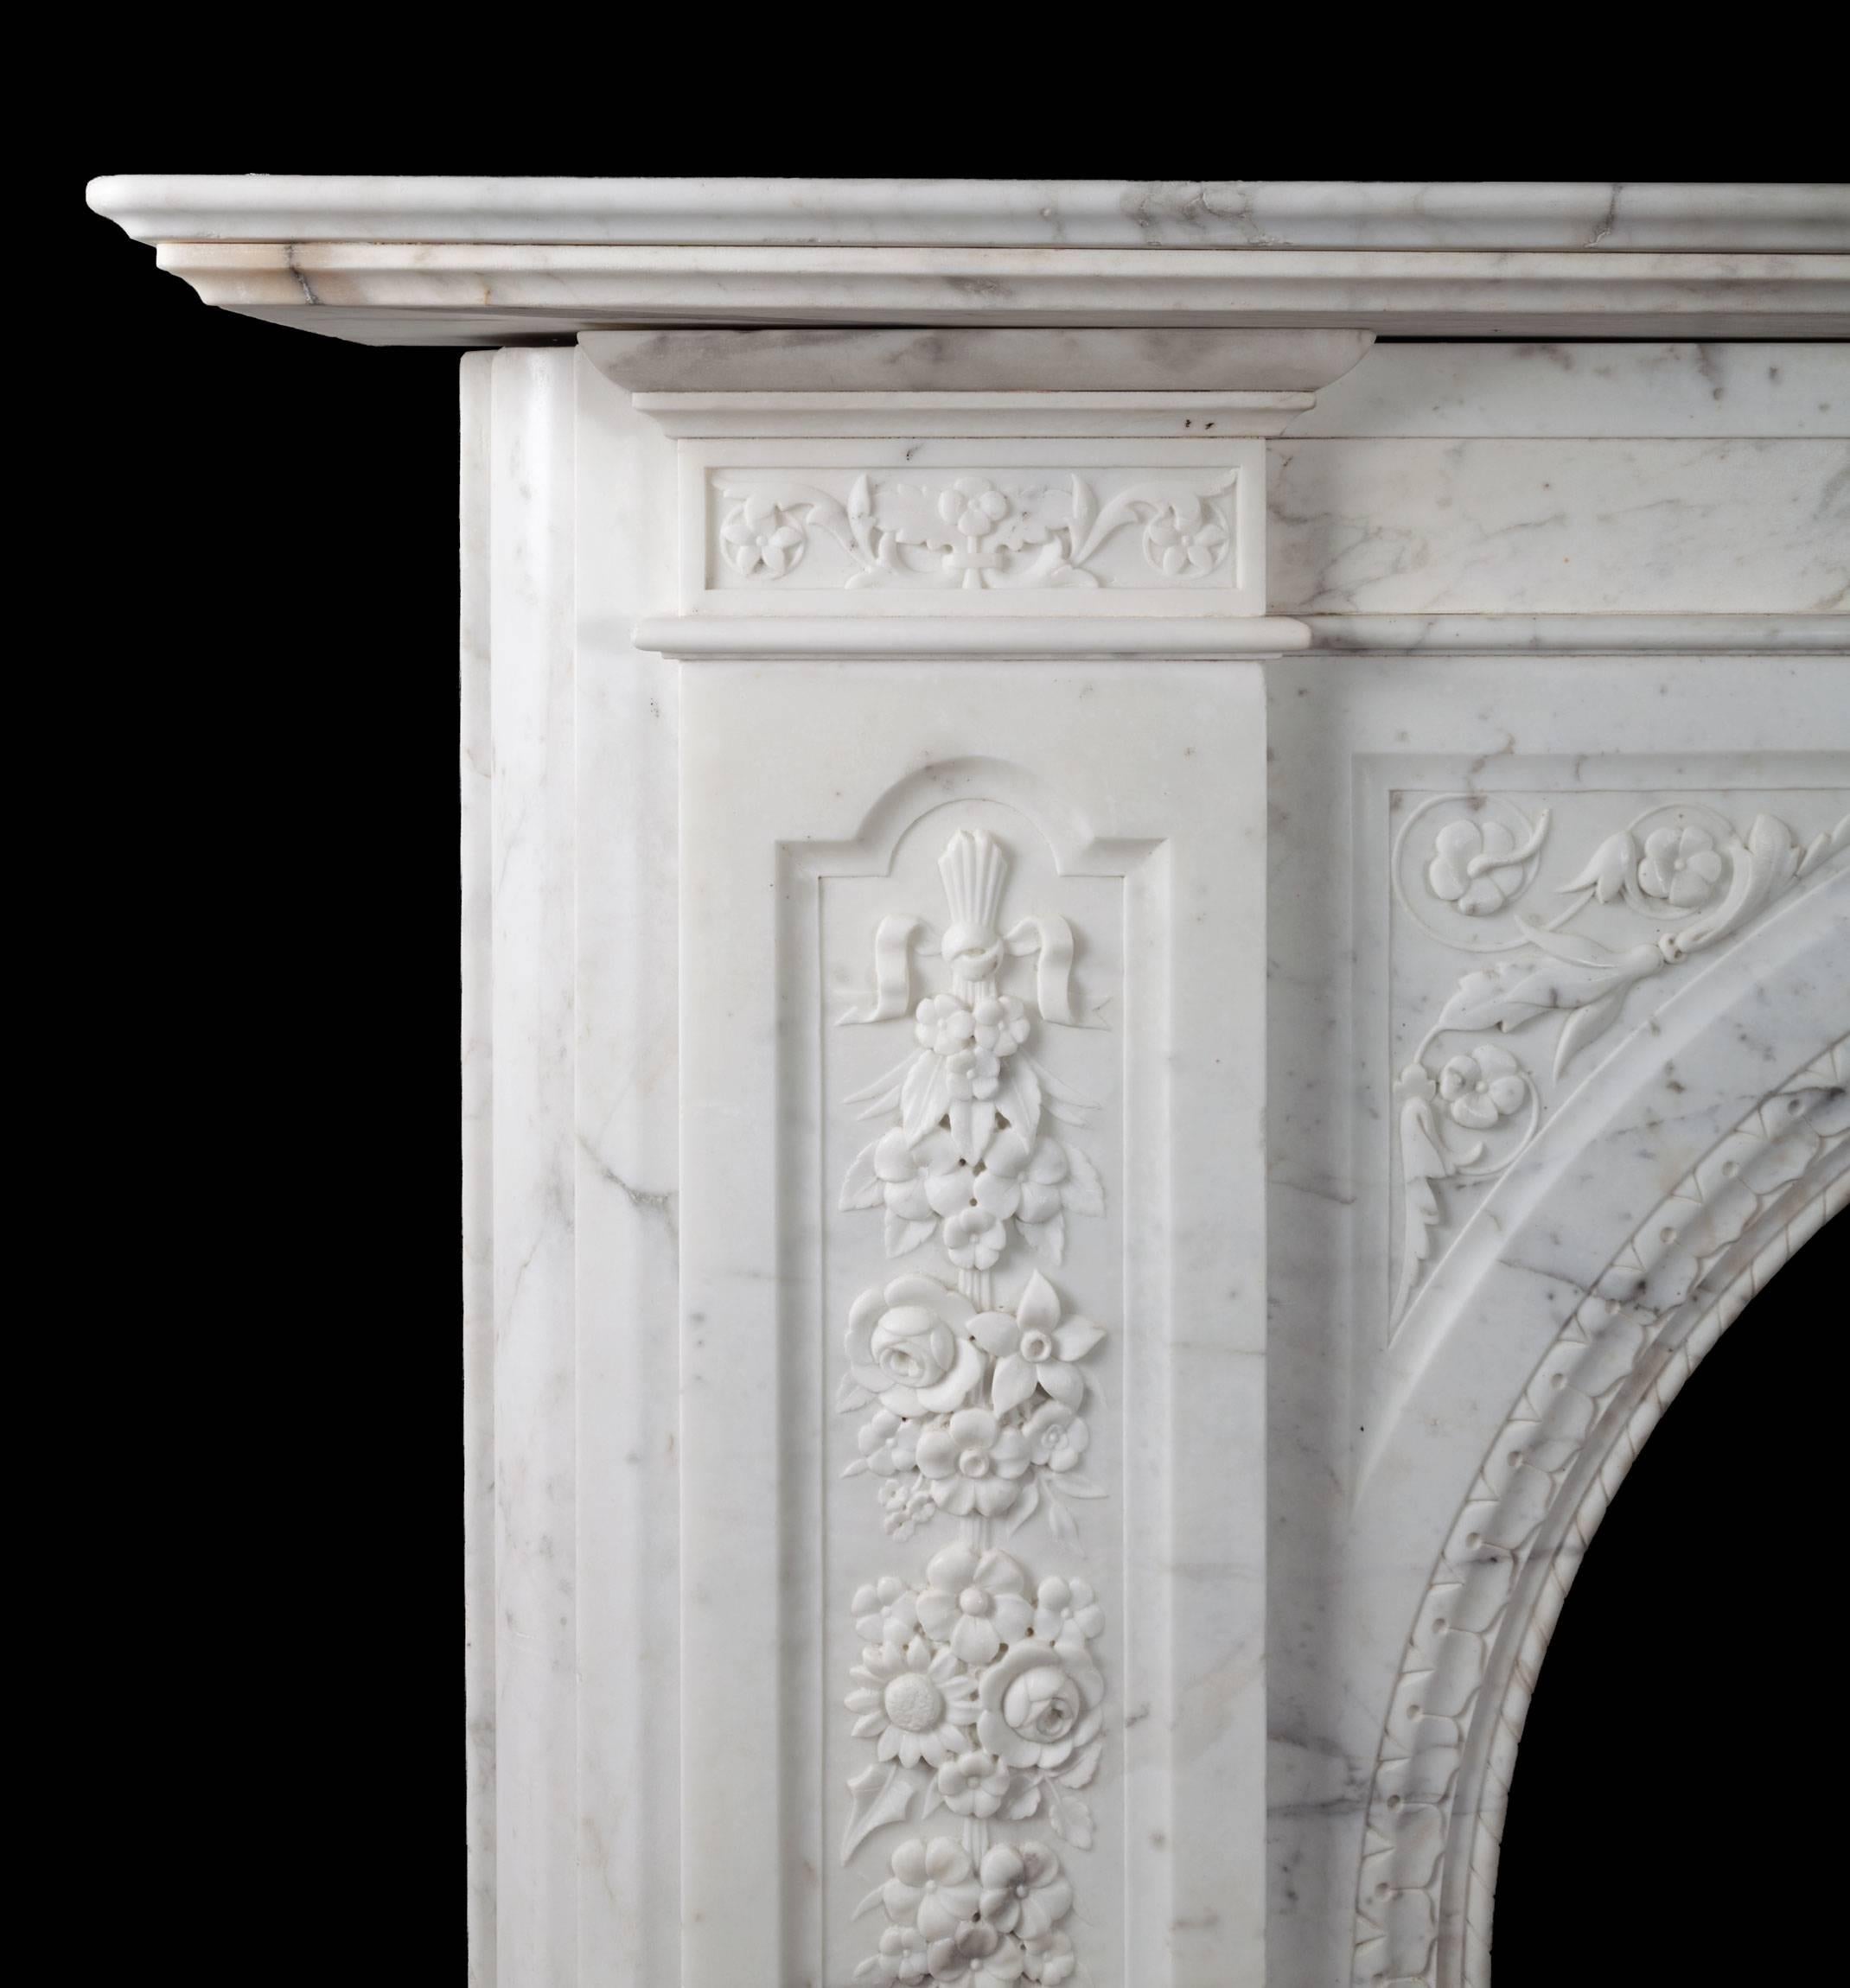 Large antique Victorian carved statuary Carrara marble fireplace. With profusely carved floral pilasters, arch spandrels and capitals. The arched fireplace opening edged with rope twist and leaf detail. The two arched panels centred with an acanthus